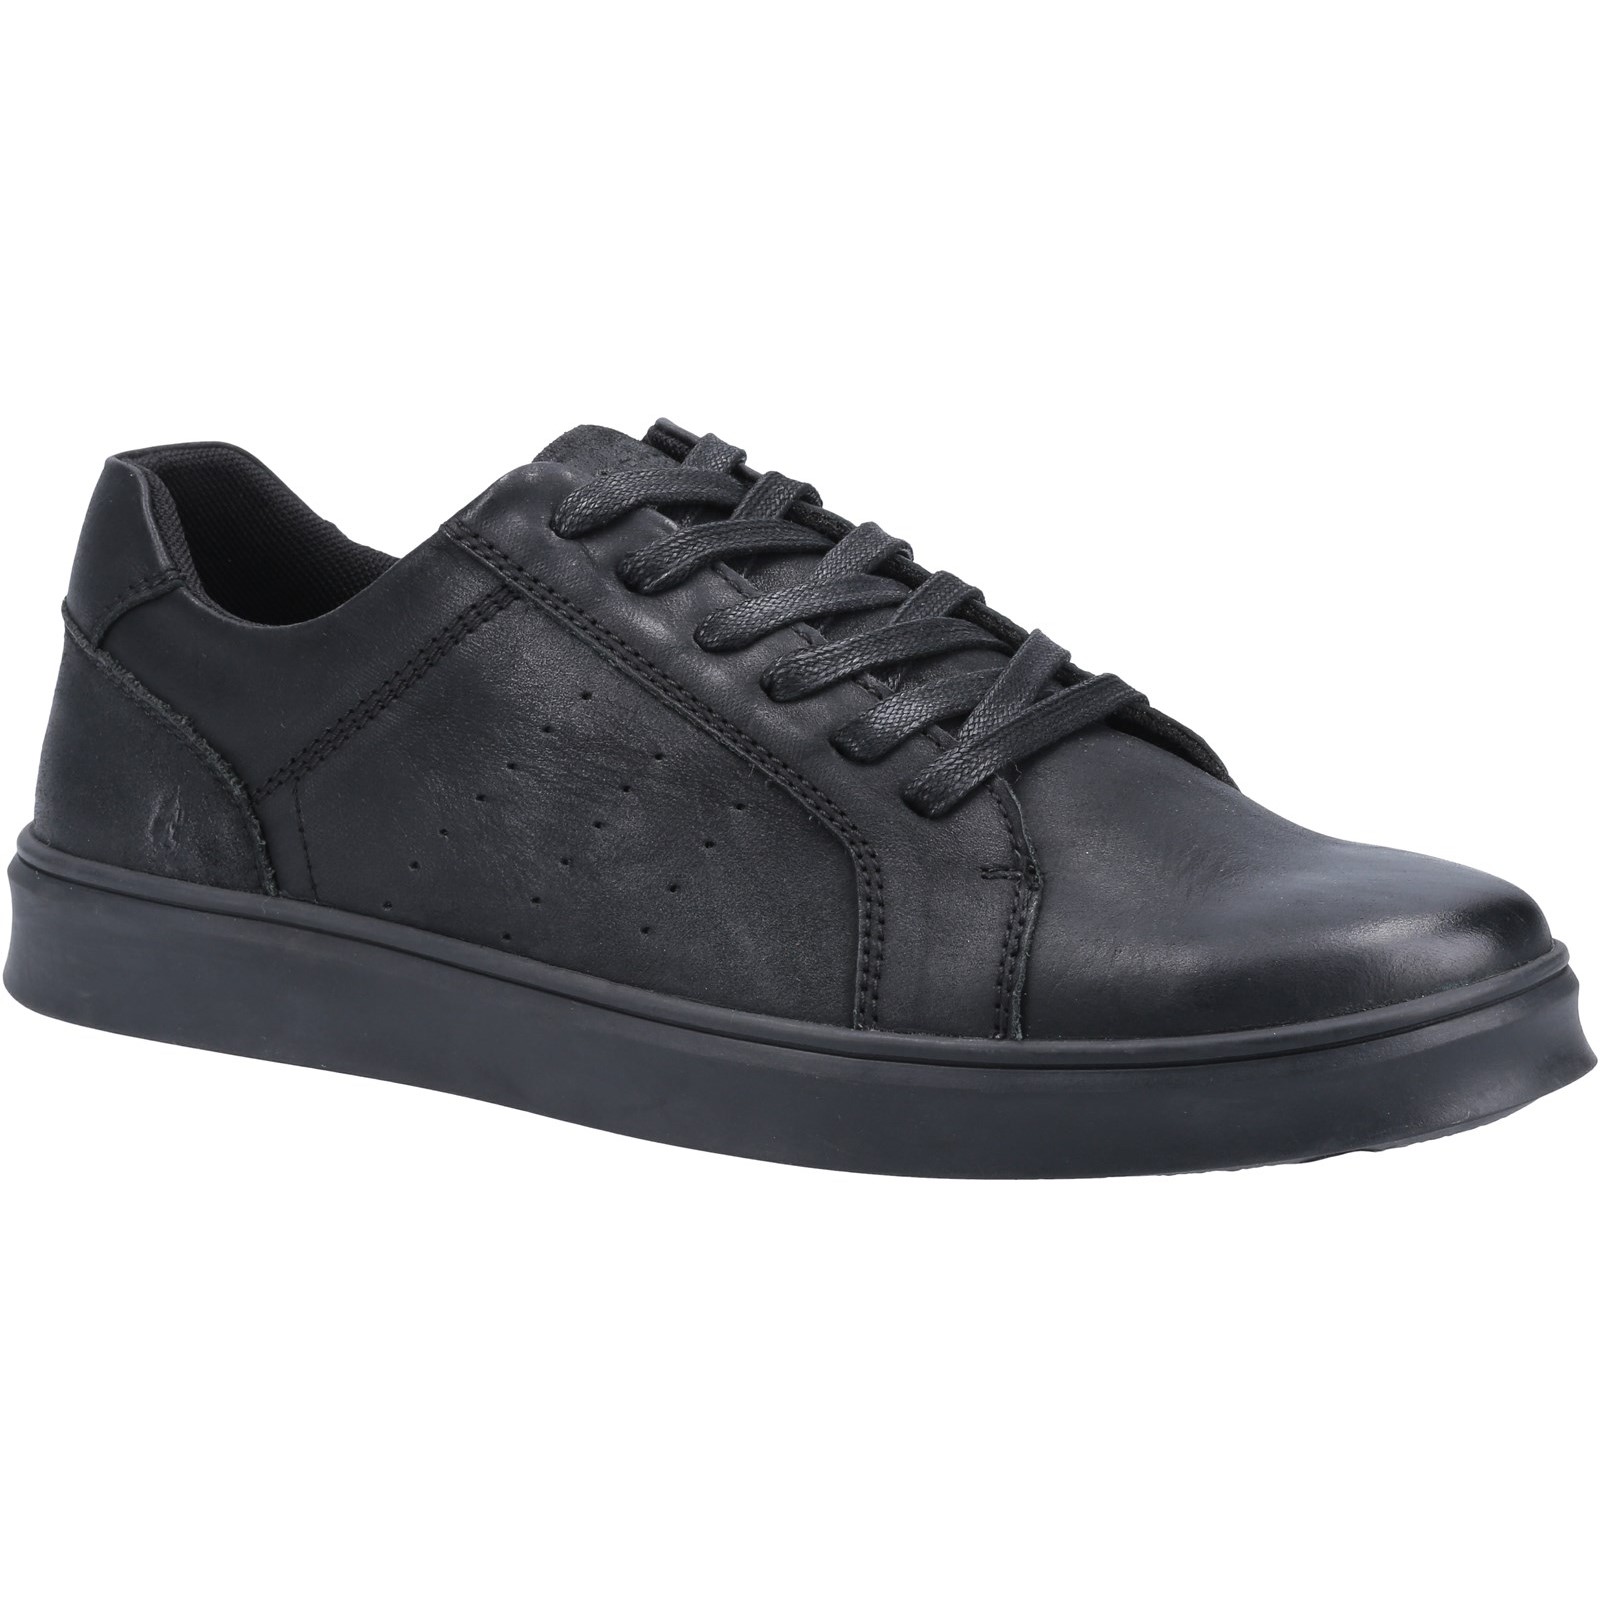 Hush Puppies Men's Mason Leather Lace Up Casual Trainers Shoes - UK 6